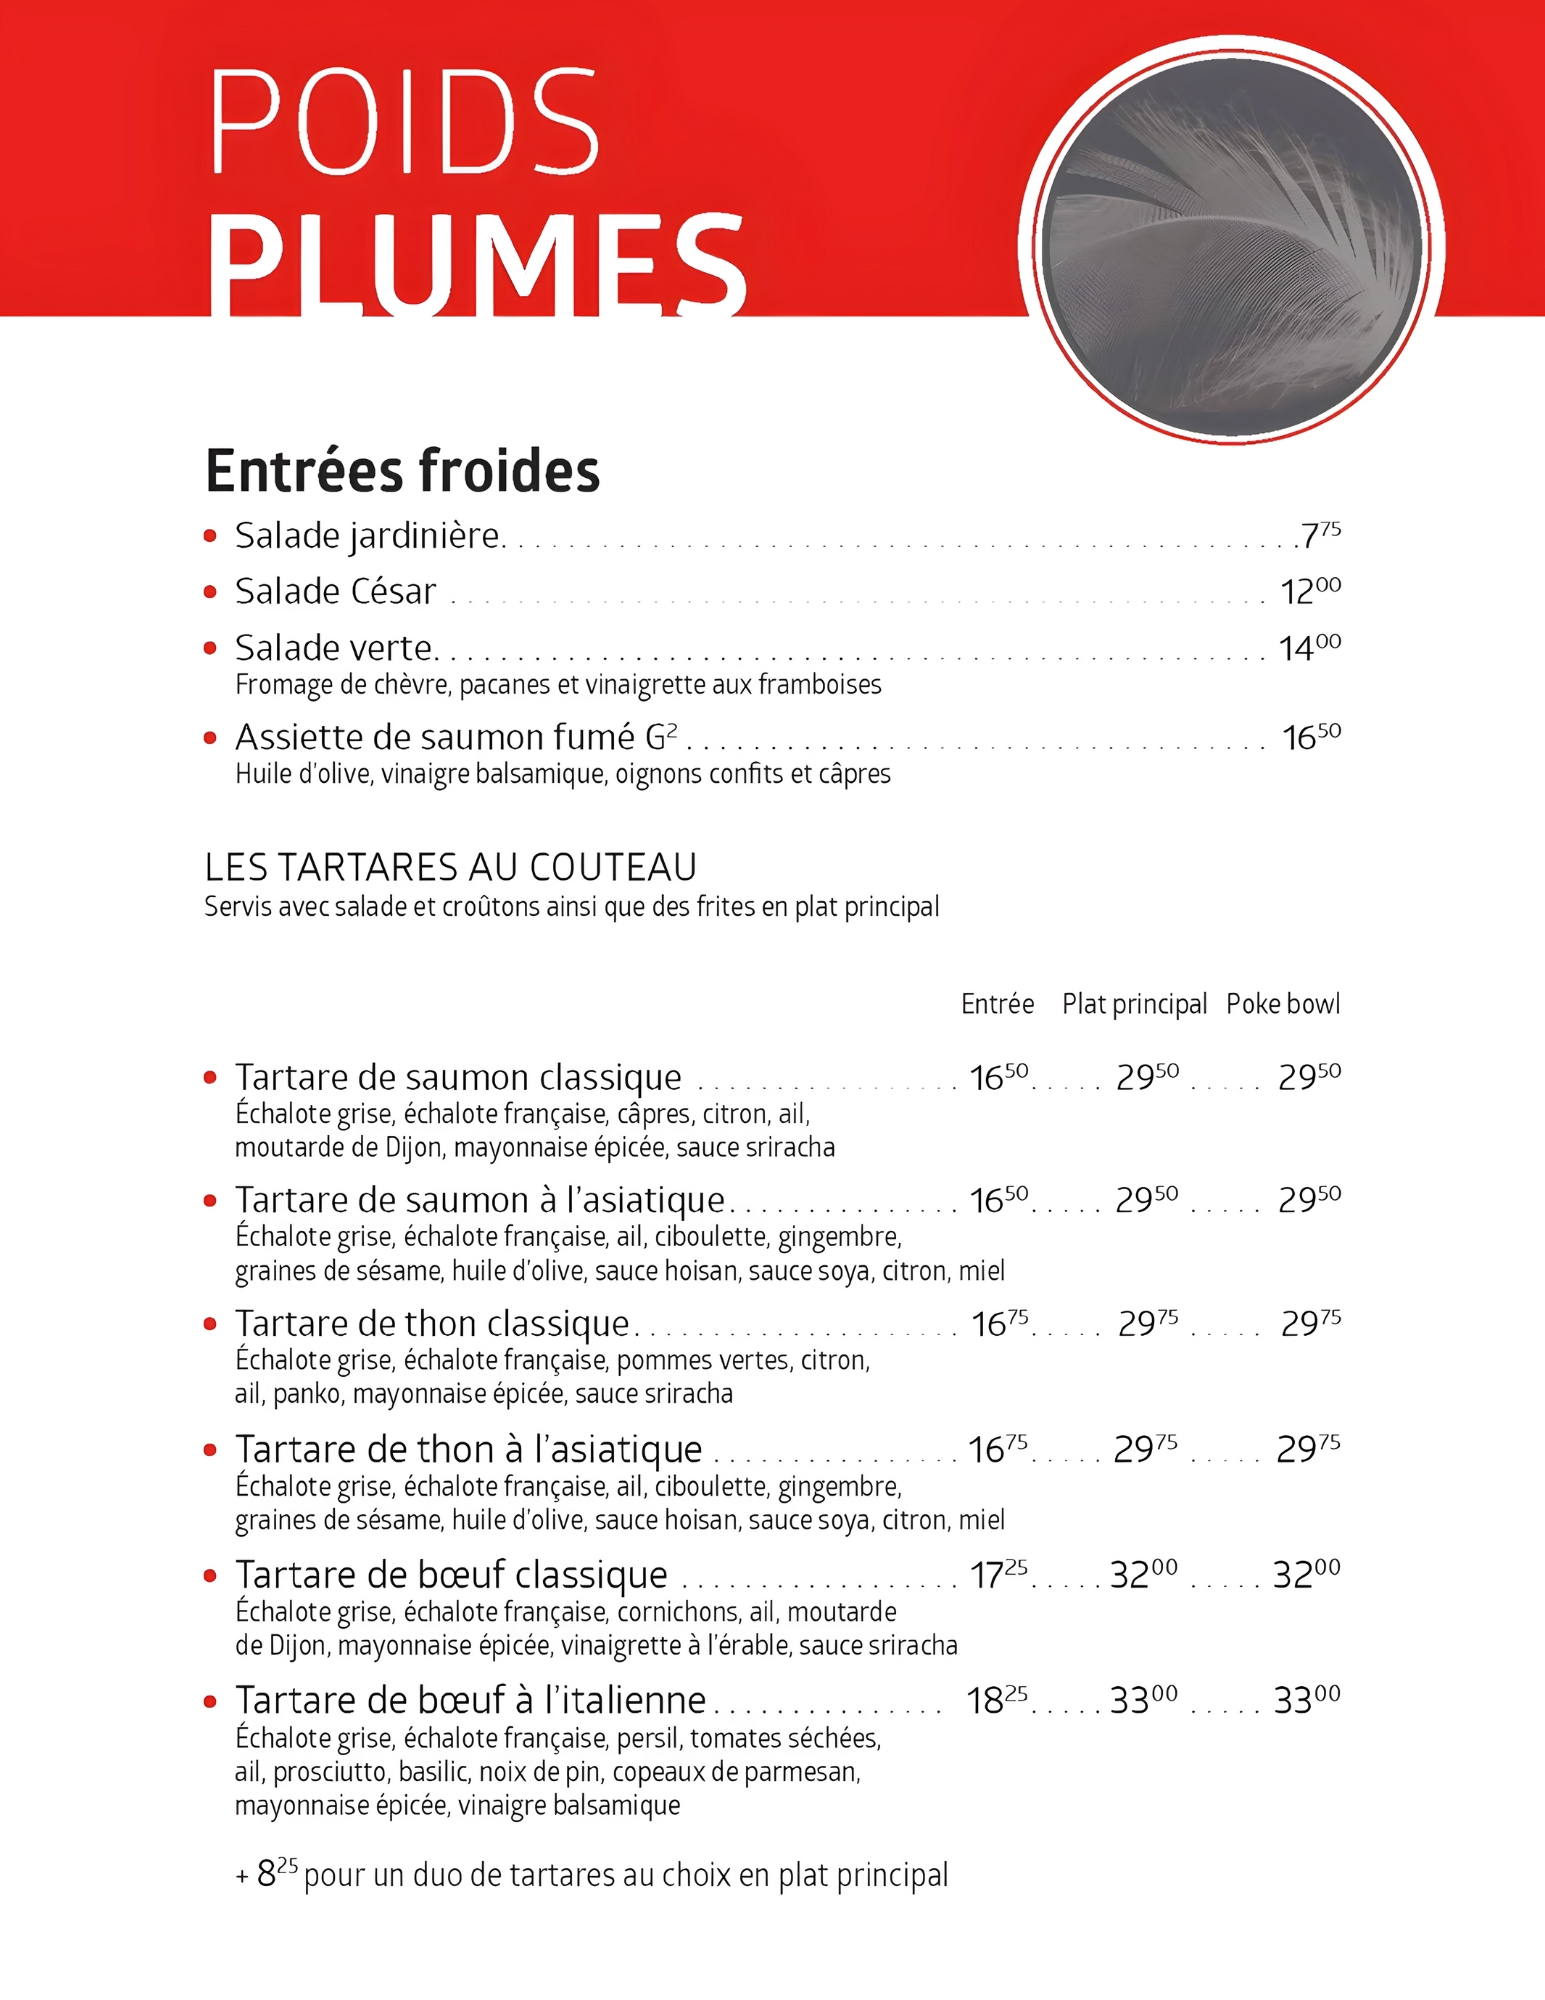 poids plumes